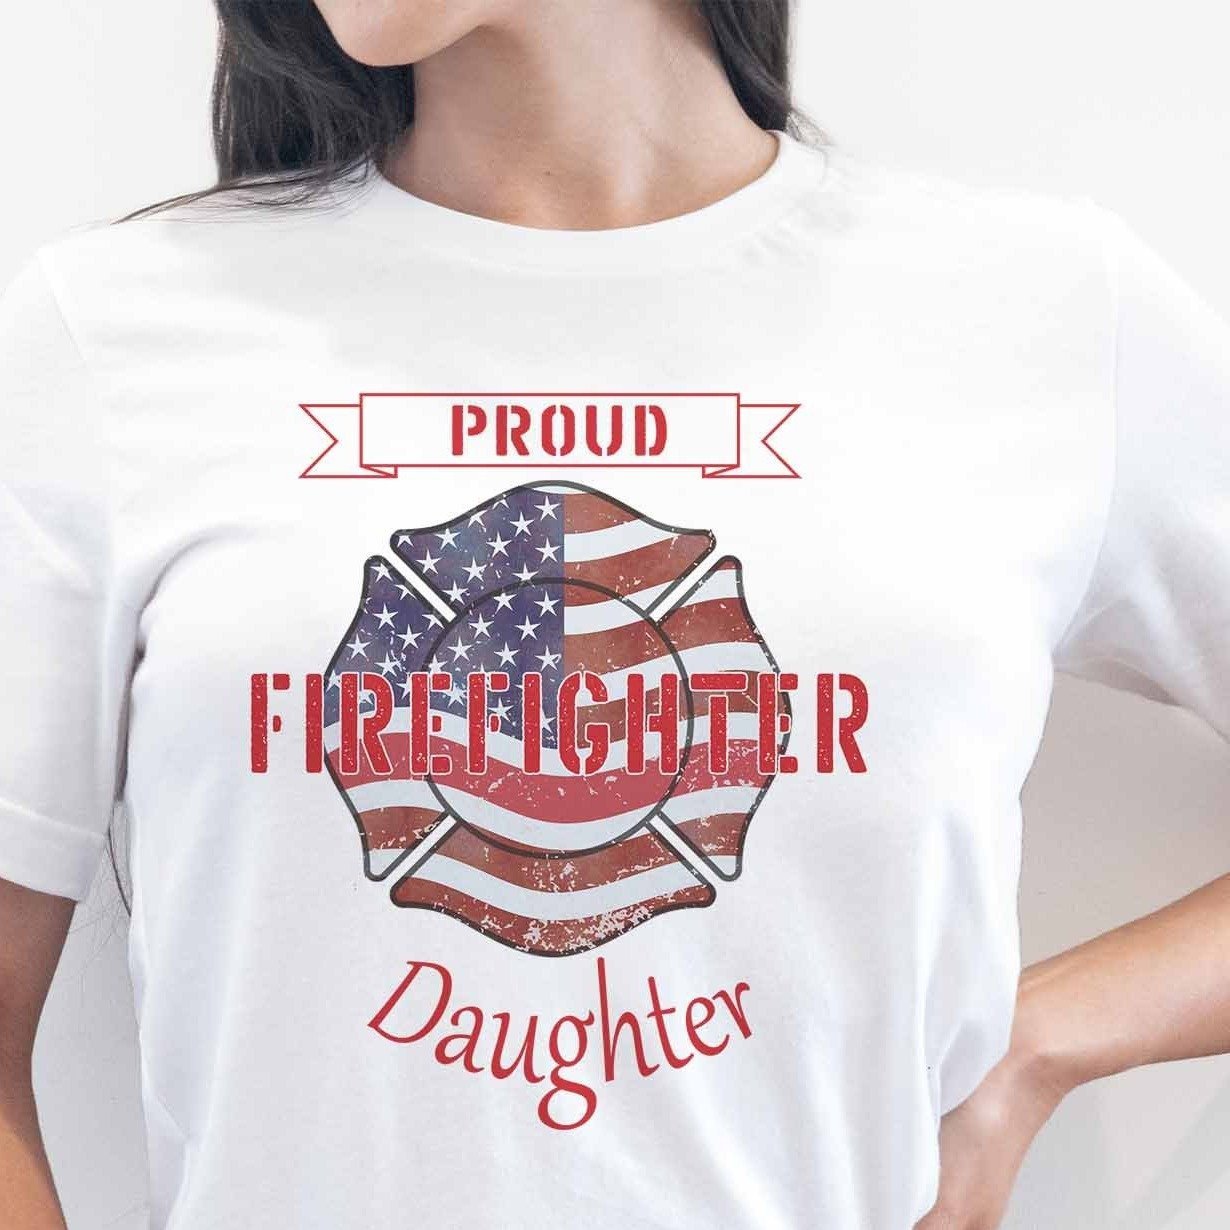 Proud Firefighter Daughter - My Custom Tee Party